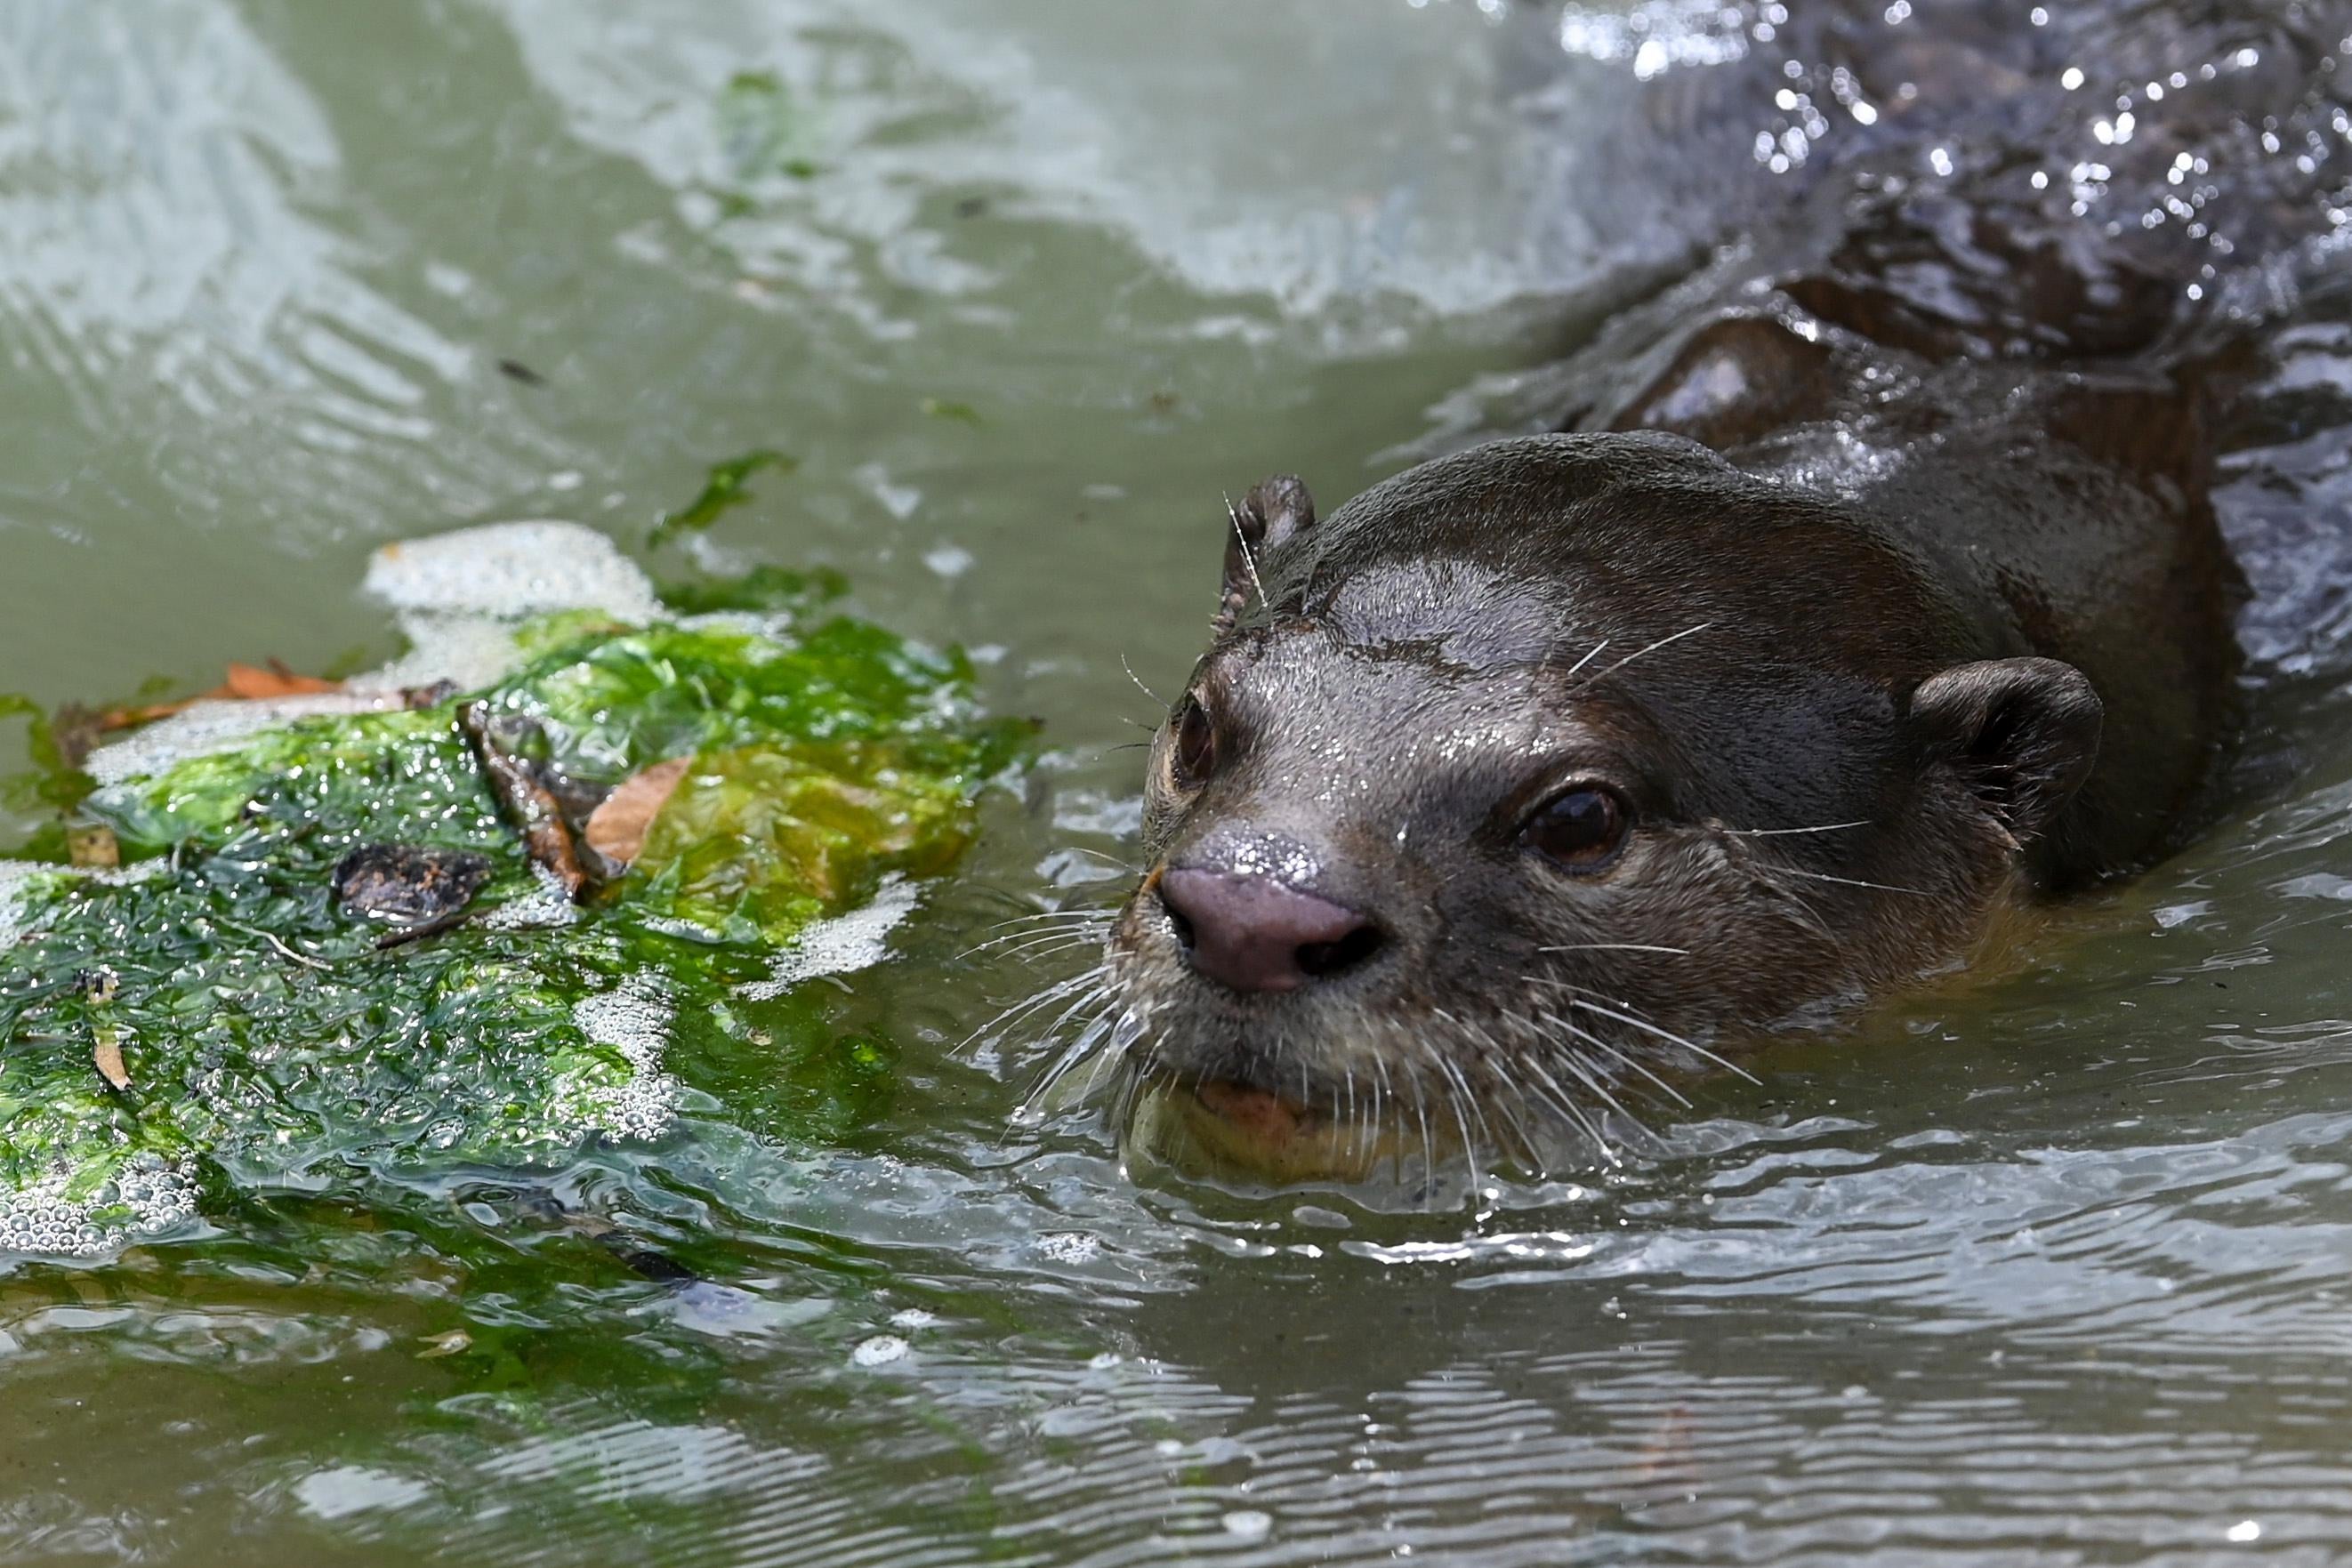 An otter swimming in a river